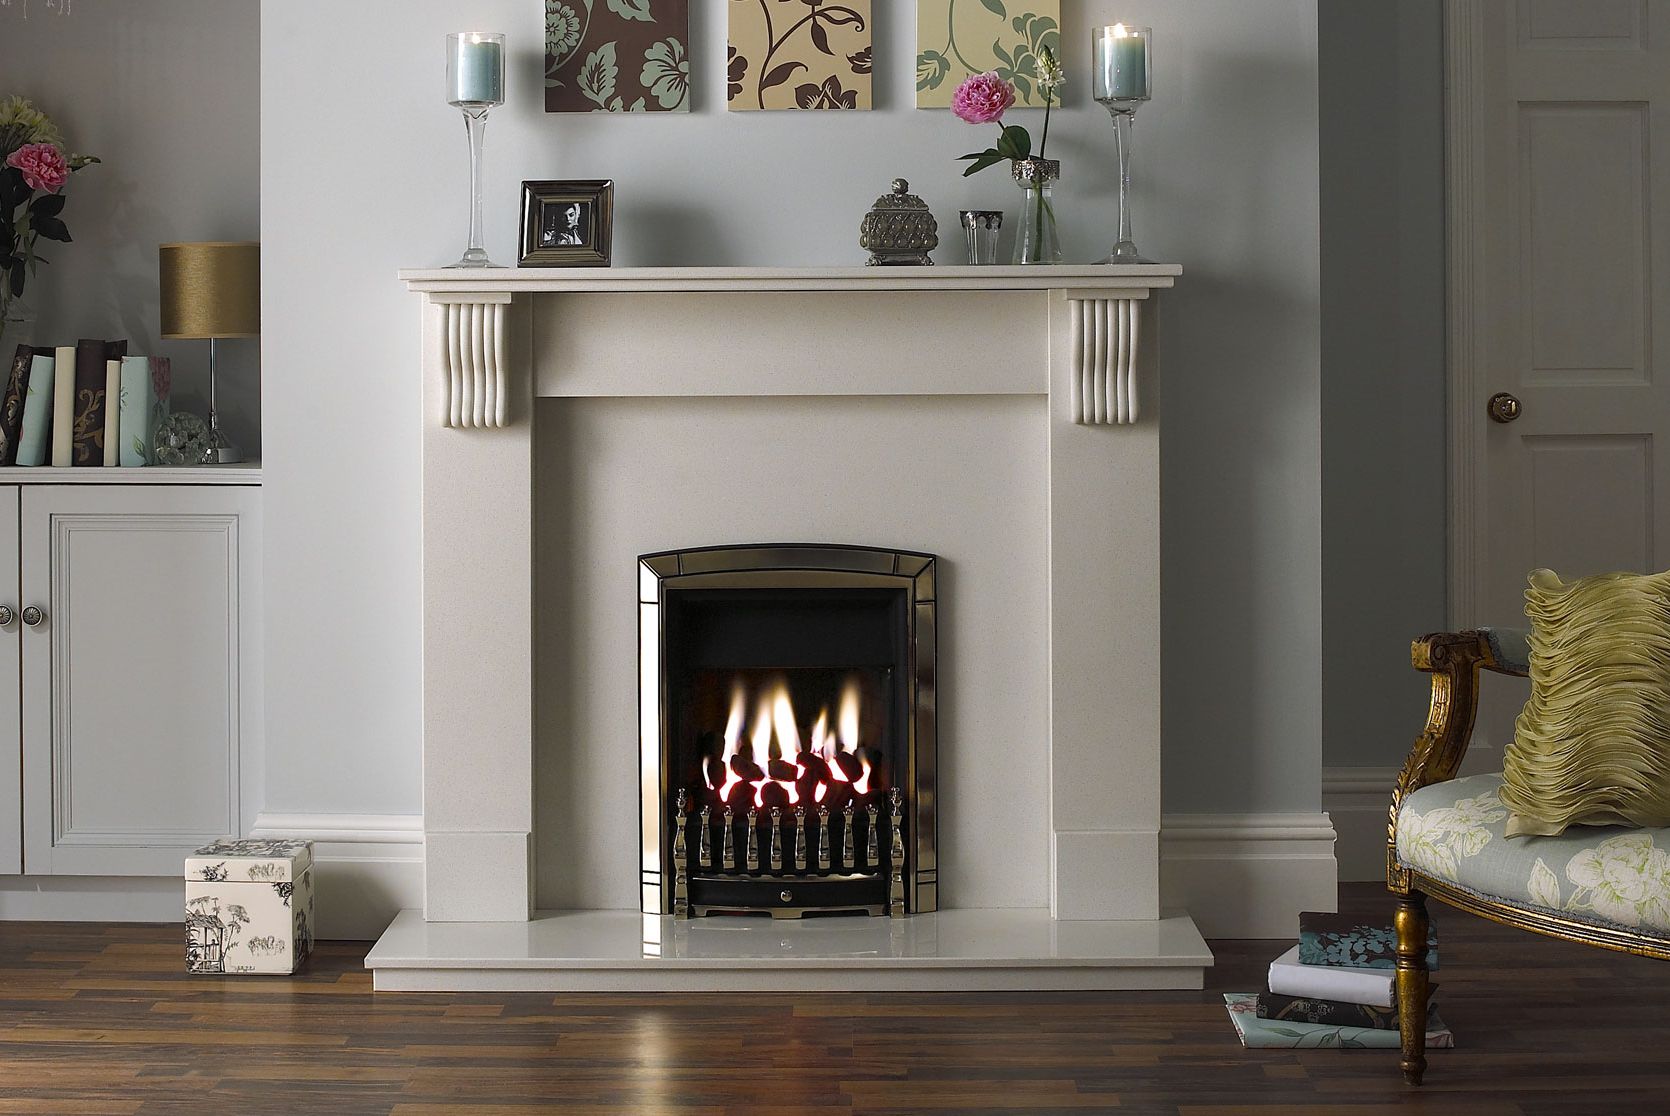 Fires & surrounds buying guide | Ideas & Advice | DIY at B&Q